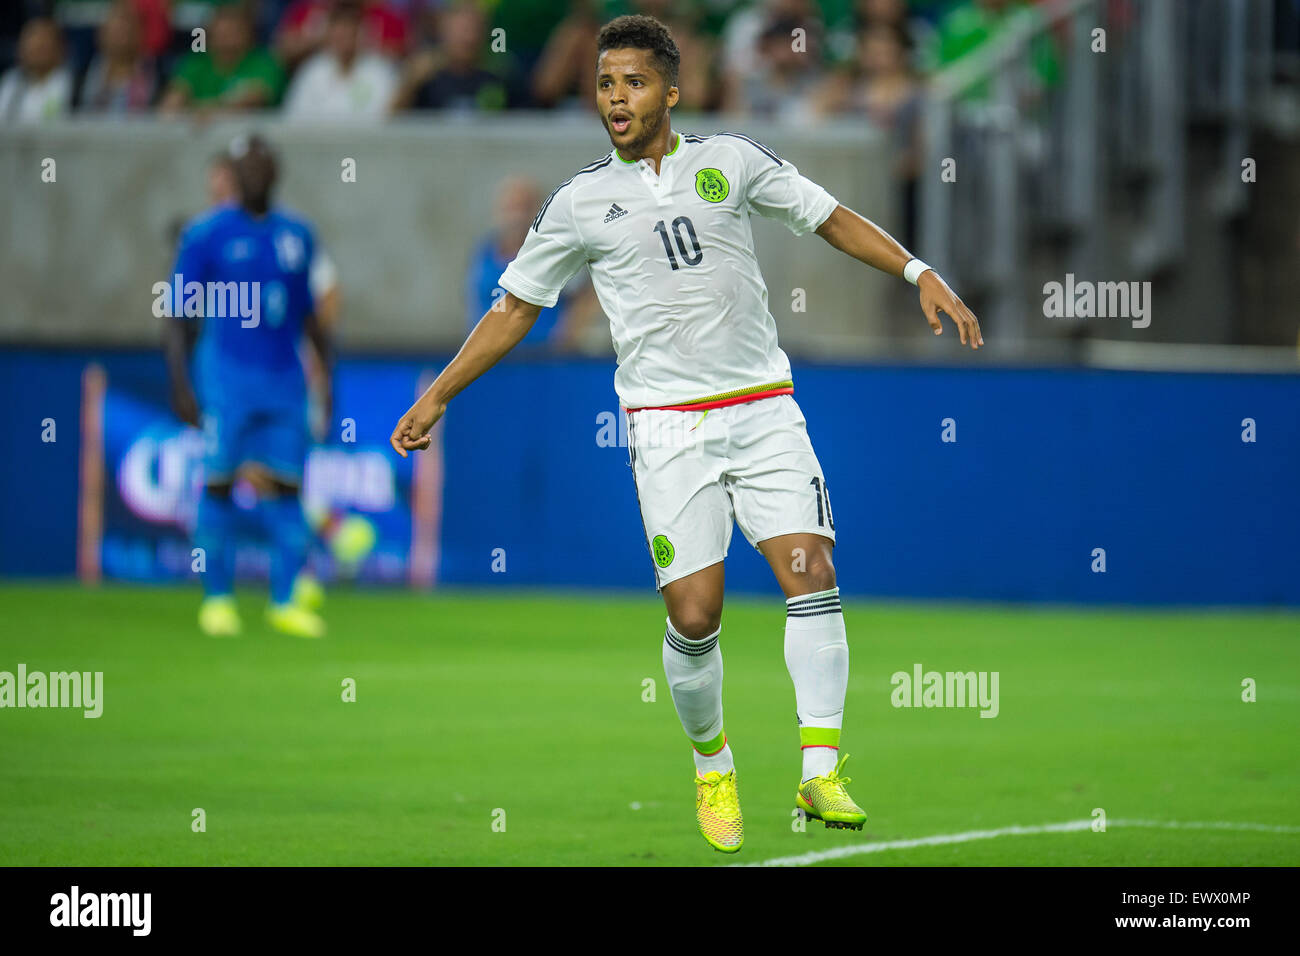 July 1, 2015: Mexico forward Giovani Dos Santos (10) reacts during the 2nd half of an international soccer match between Honduras and Mexico at NRG Stadium in Houston, TX. The game ended in a 0-0 draw.Trask Smith/CSM Stock Photo